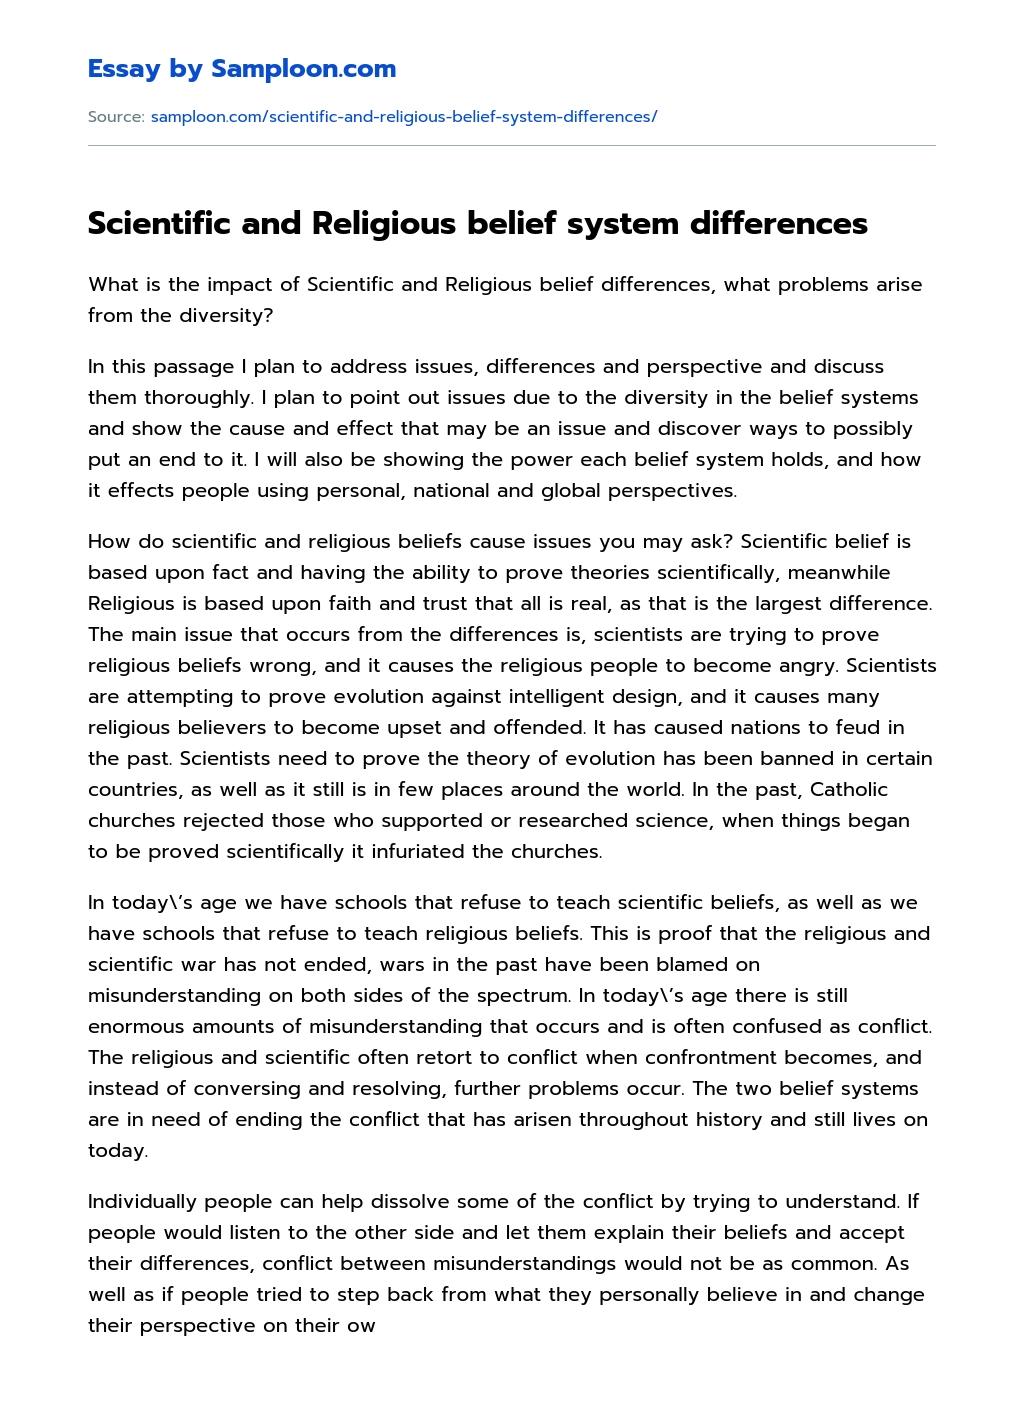 Scientific and Religious belief system differences essay